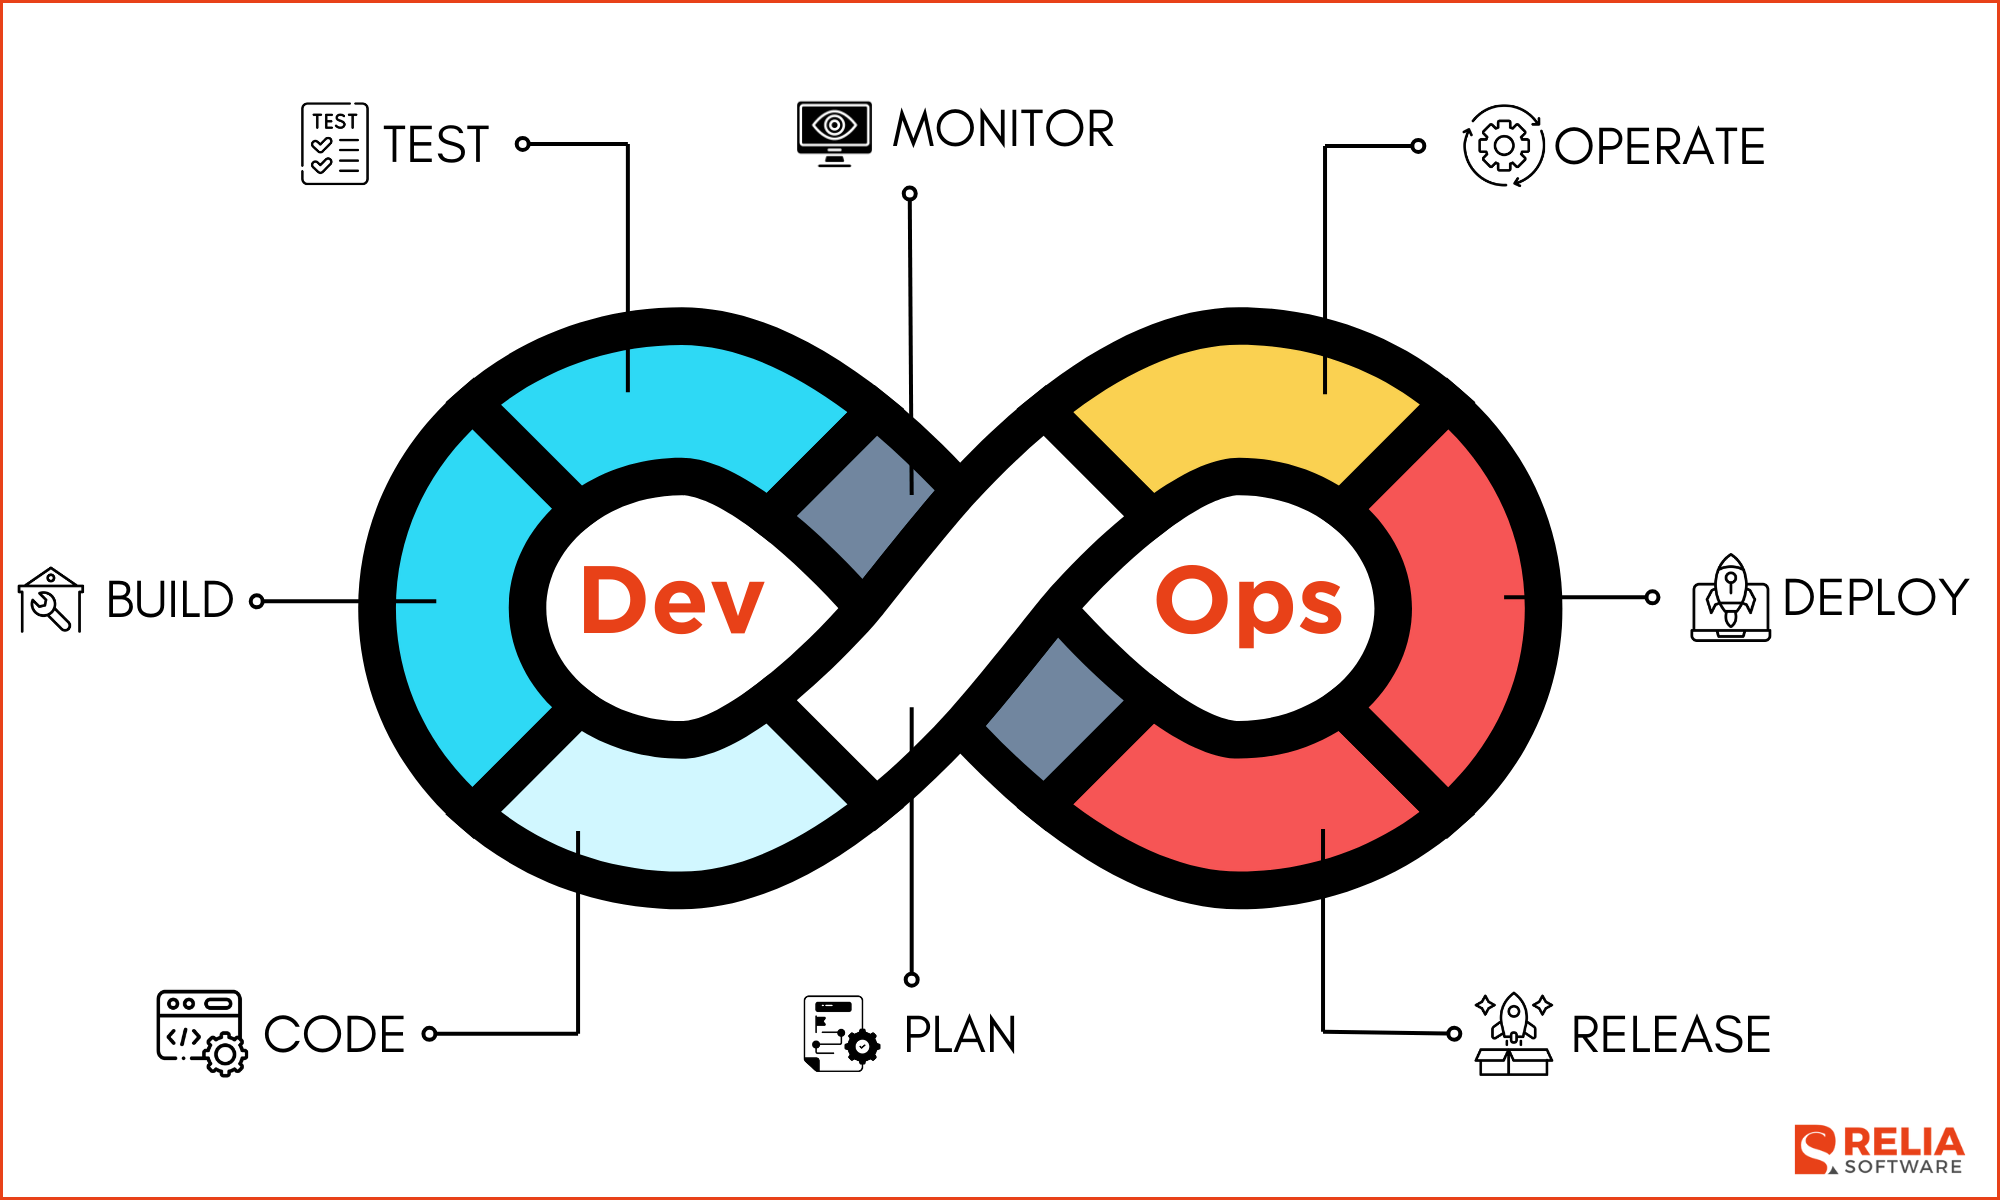 The DevOps Model is a software development methodology that integrates development (Dev) and operations (Ops) teams